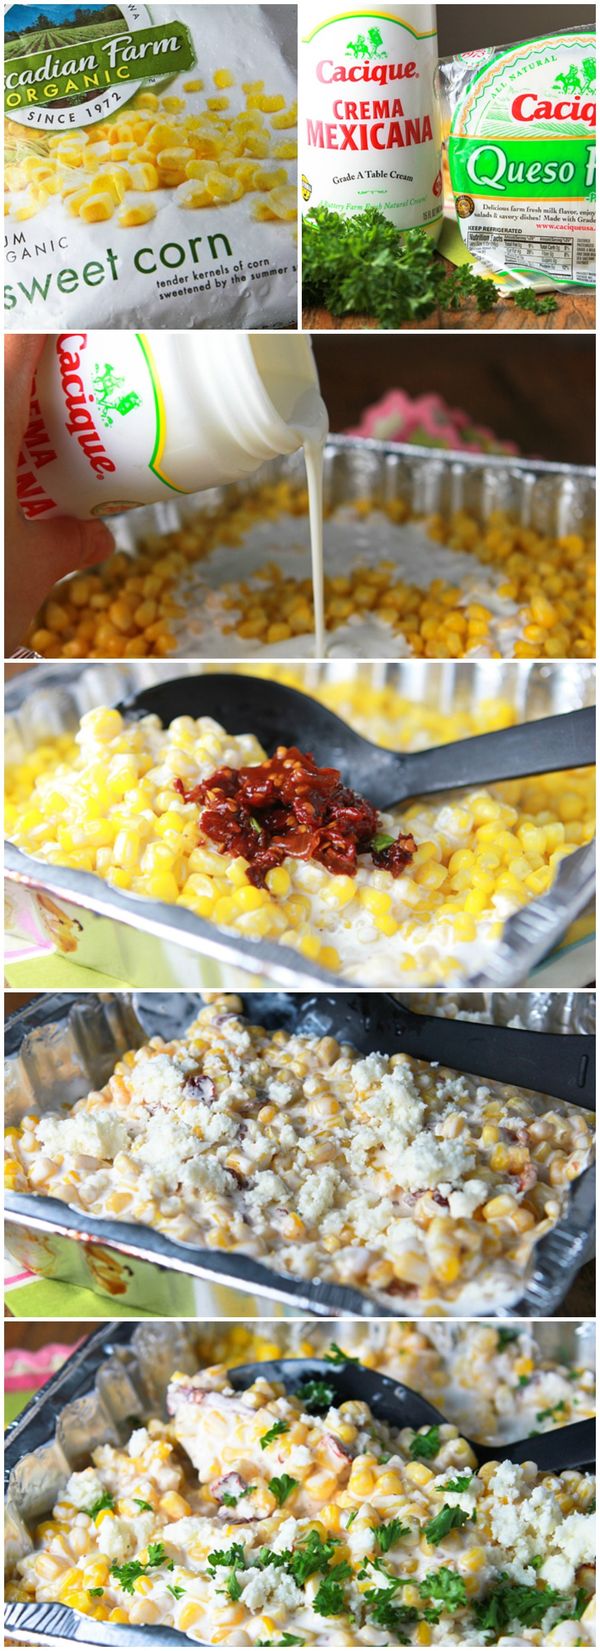 Chipotle Creamed Corn on the Grill